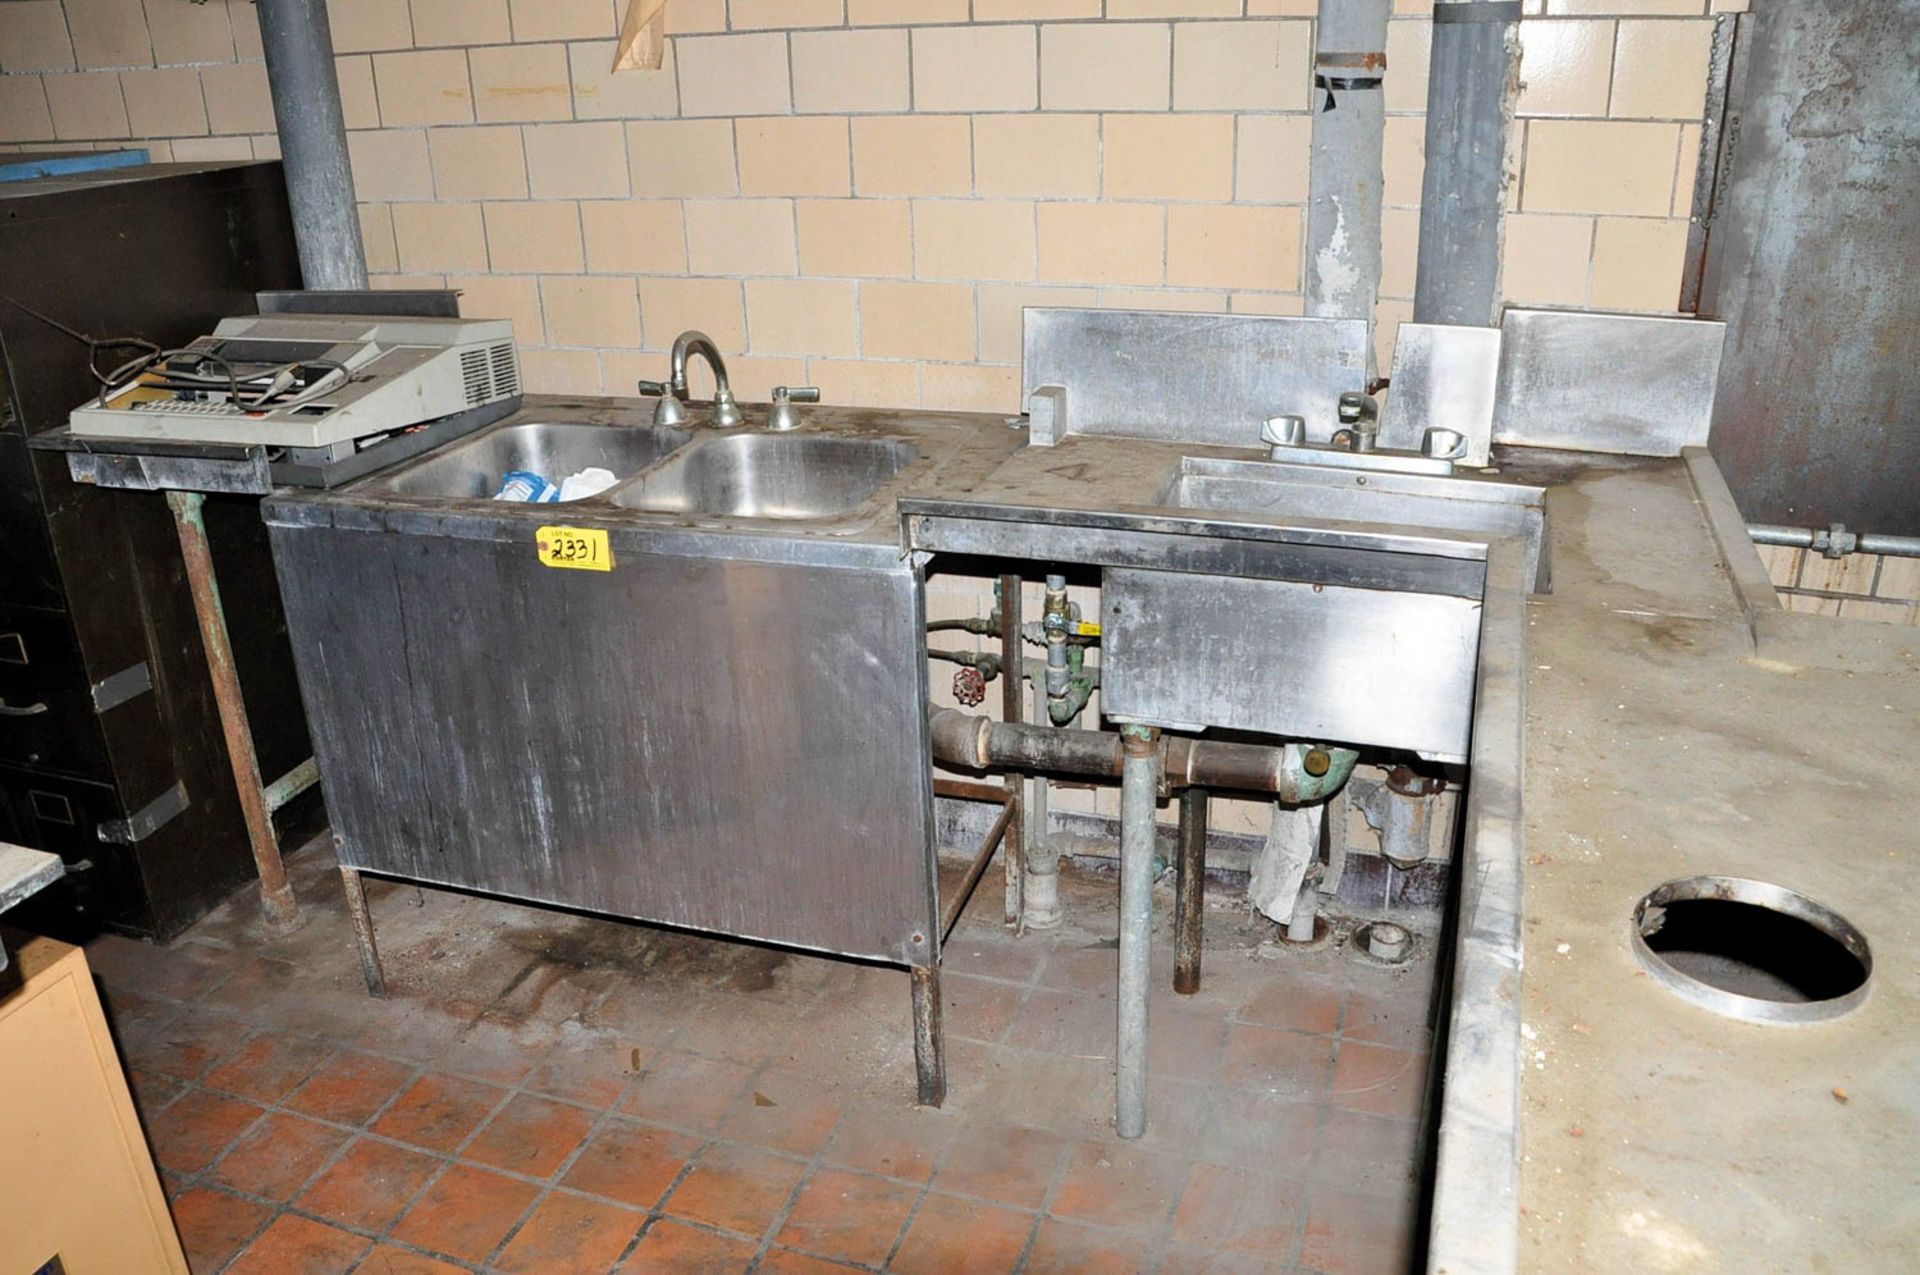 HOBART MDL.GM-2, DISHWASHING STATION WITH STAINLESS STEEL COUNTERS, (1) SINGLE BASIN SINK & (1) 2- - Image 3 of 5